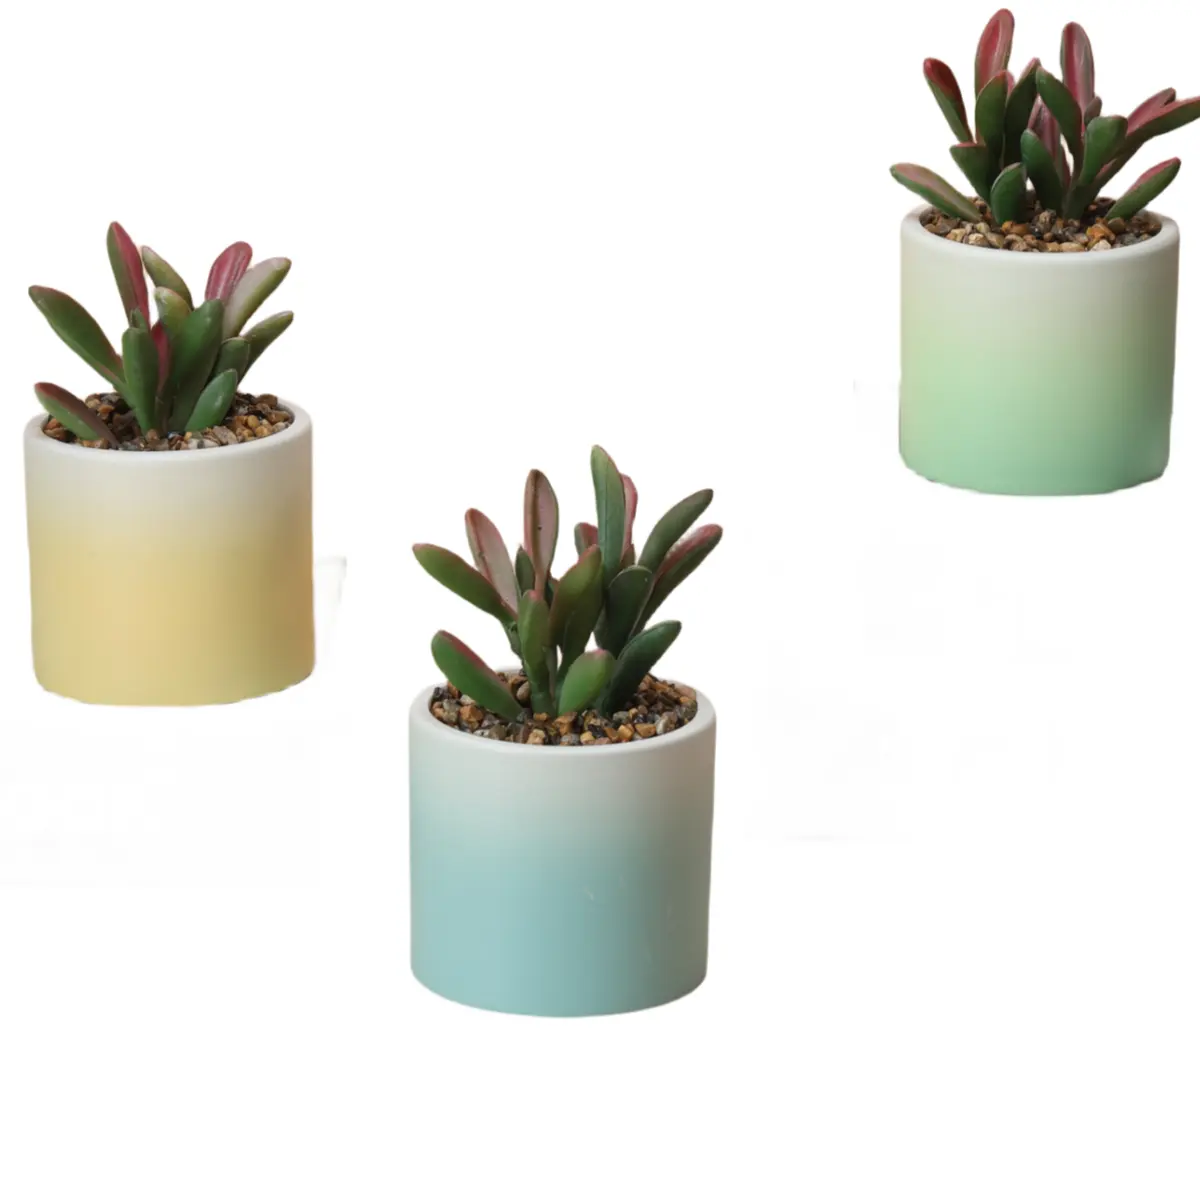 Stylish Gradient Succulent ceramic planter pot Good-Looking ceramic pots for plants Home Office and Photography